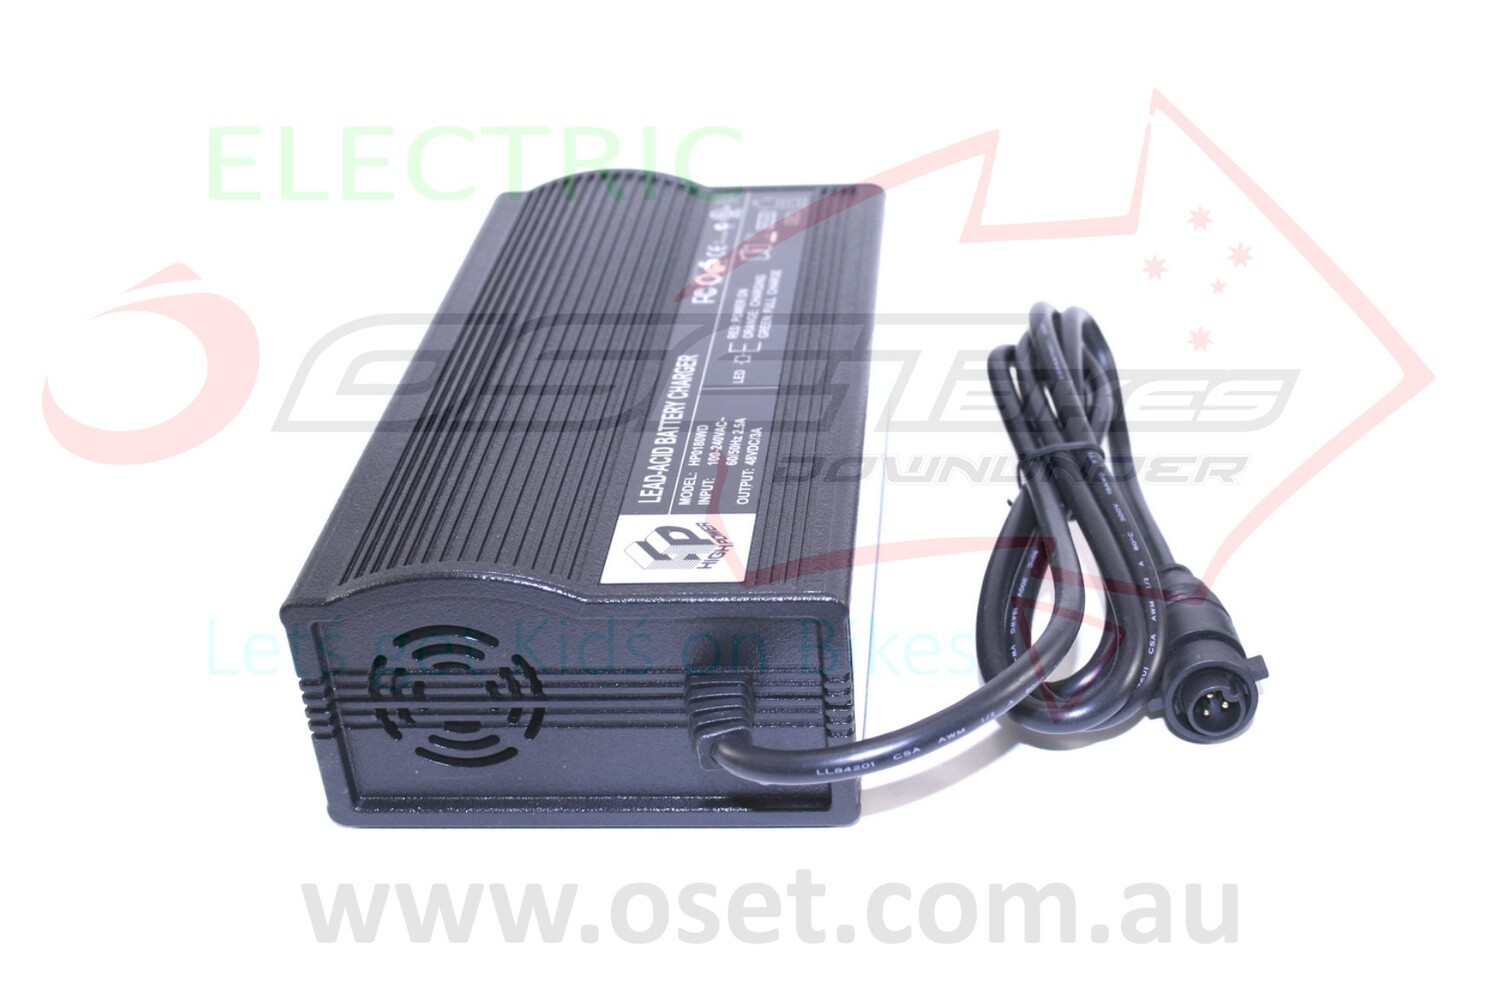 Charger for 20E, 20R 48V, 3A